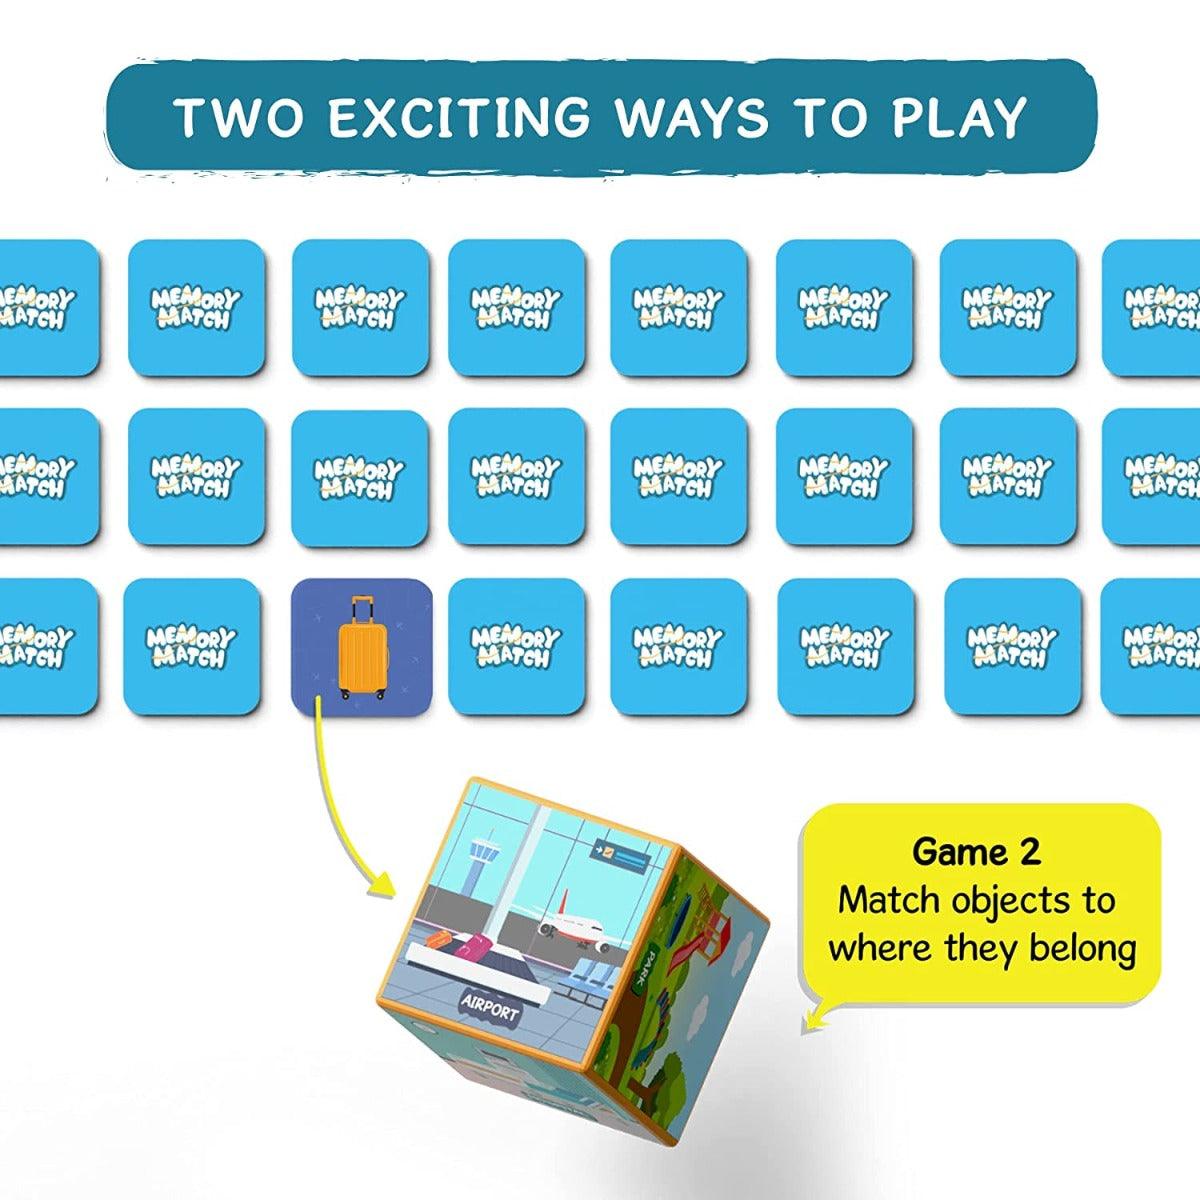 Skillmatics Memory Match Board Game : Where Things Belong Fun & Fast - Memory Game for Kids Ages 3 to 7